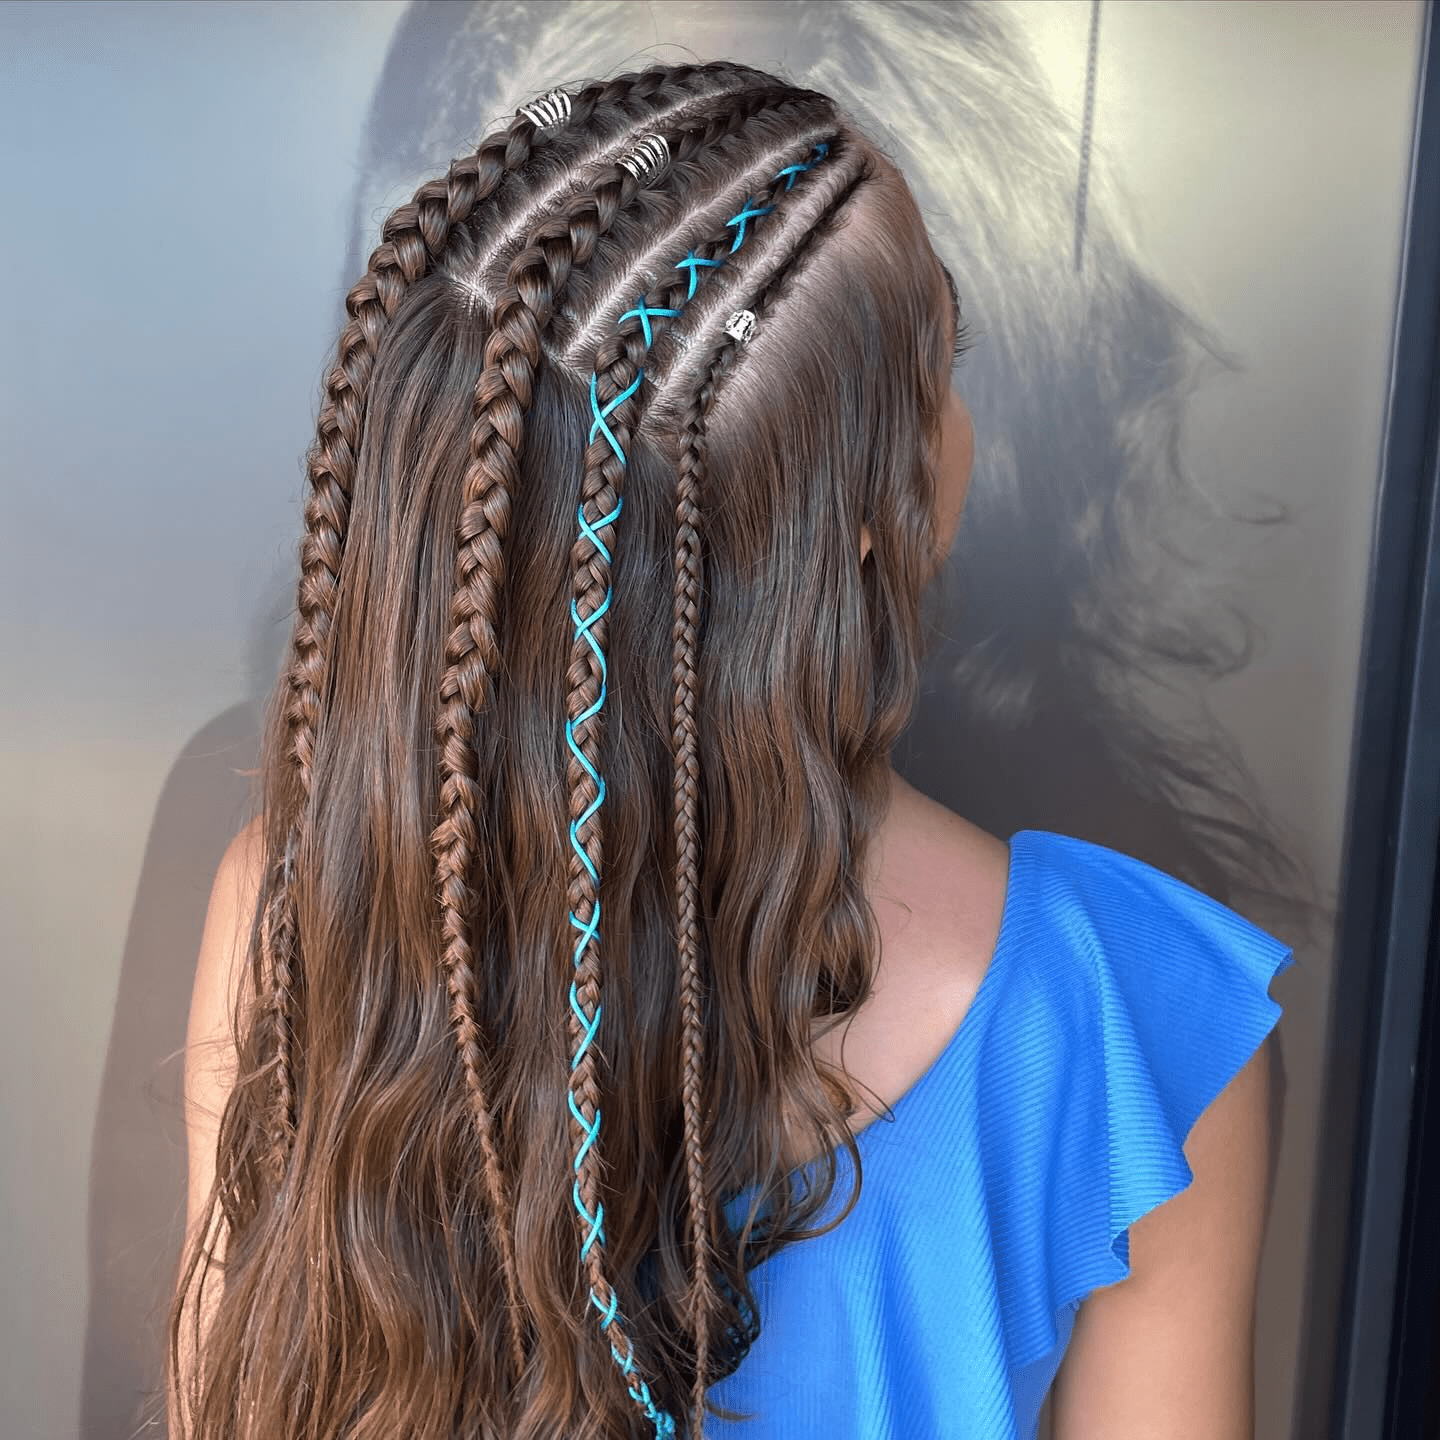 Bold Braids with Turquoise Twists